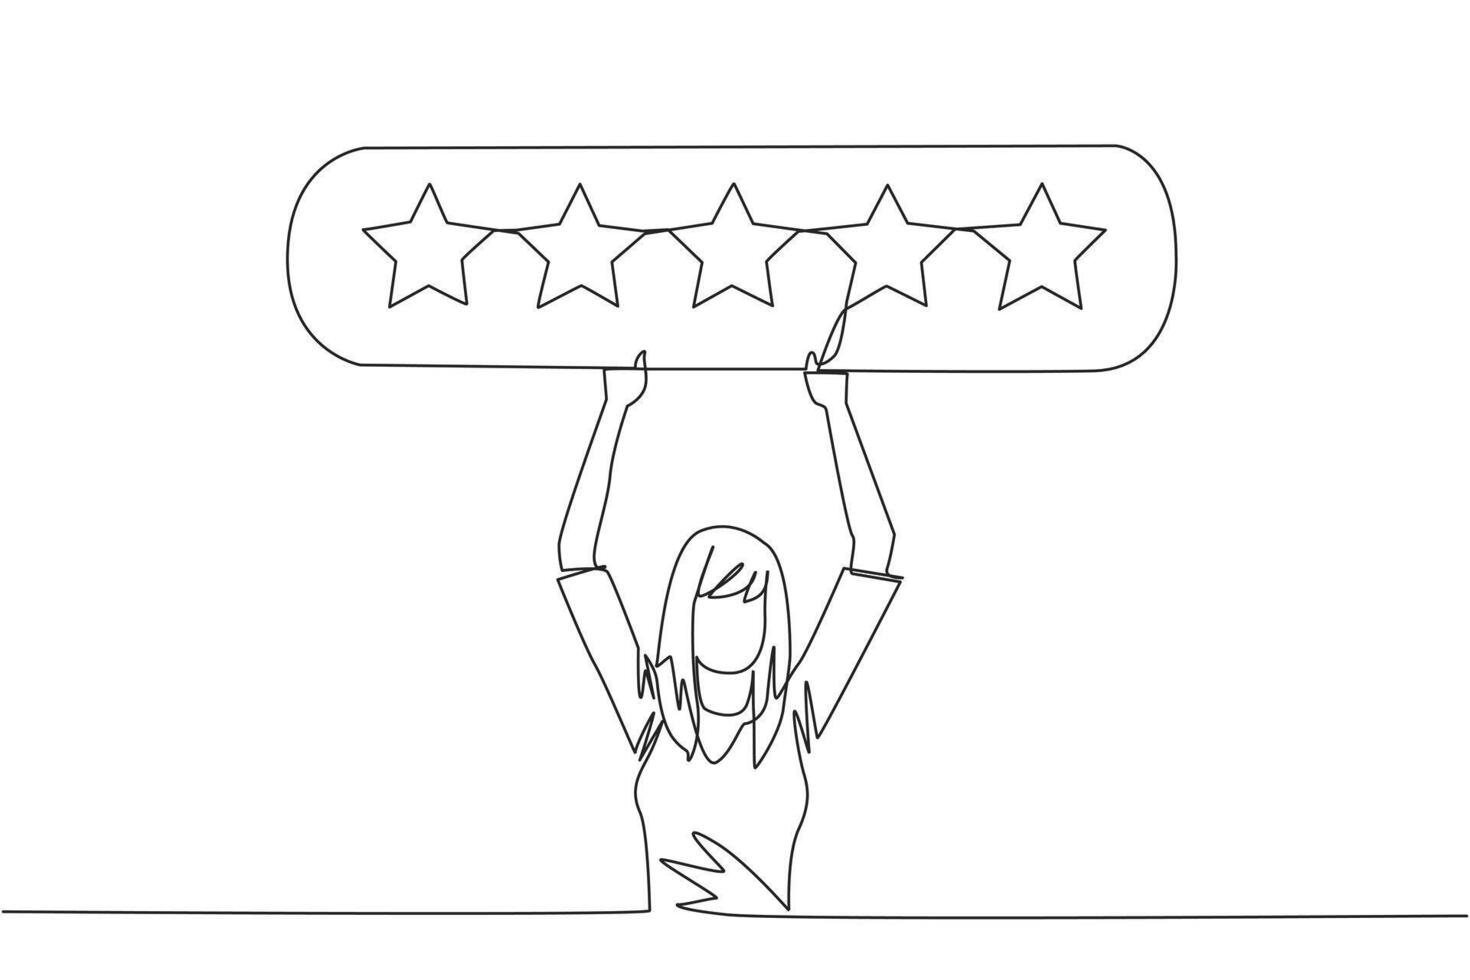 Single one line drawing young happy woman holding rating board which contains 5 stars. Star rating. Positive review. Online shopping with give 5 rating. Continuous line design graphic illustration vector